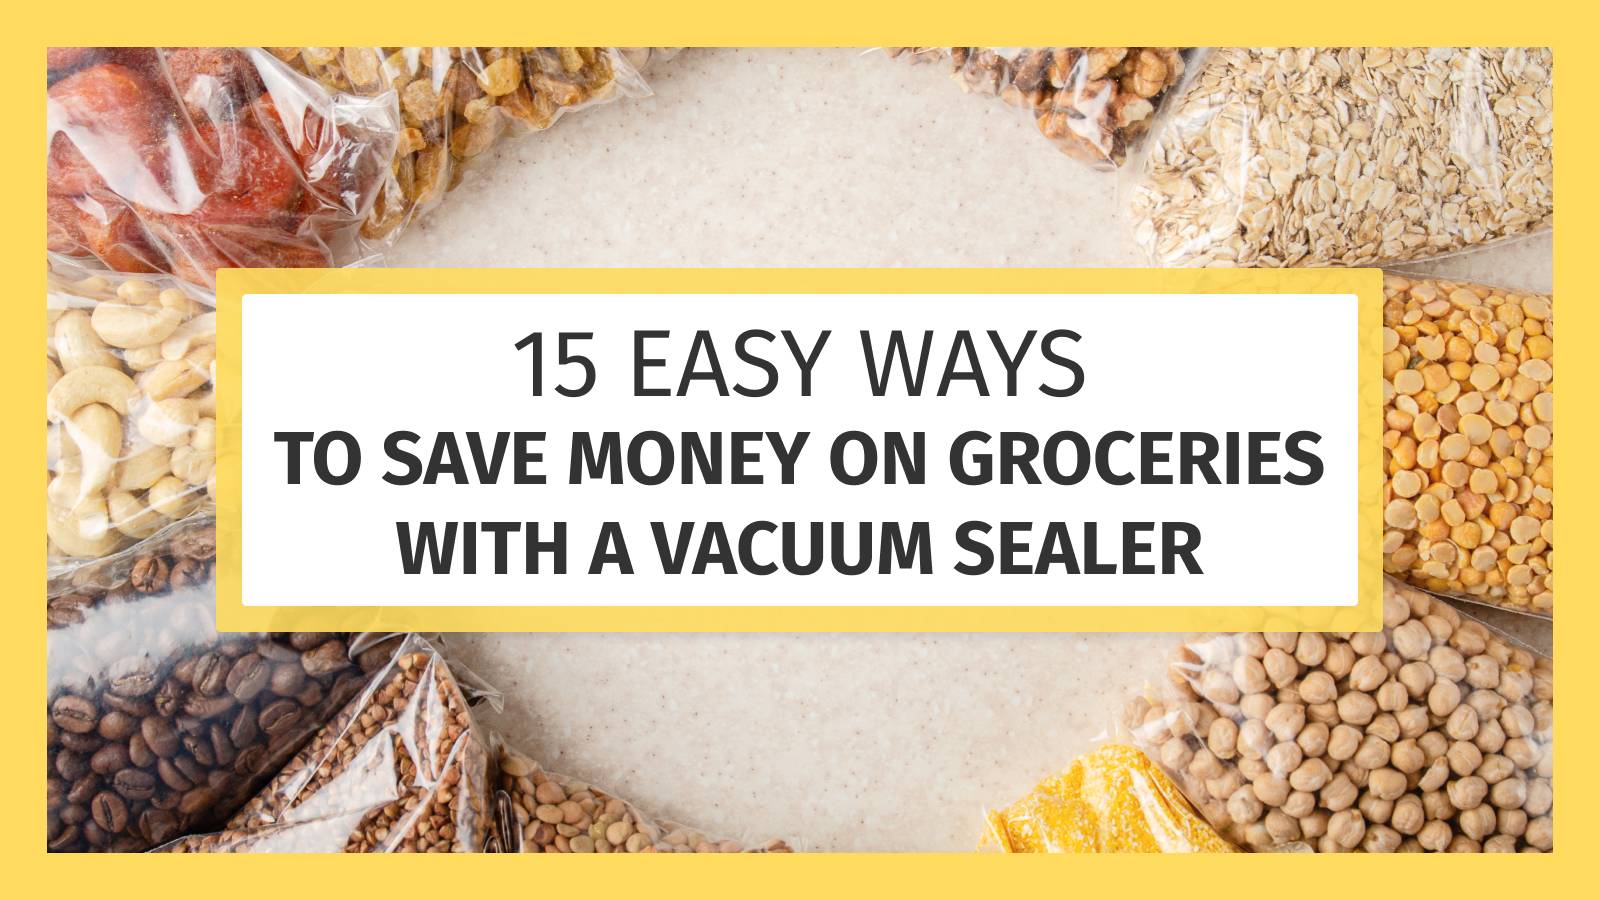 15 Easy Ways to Save on Groceries Through Vacuum Sealing 